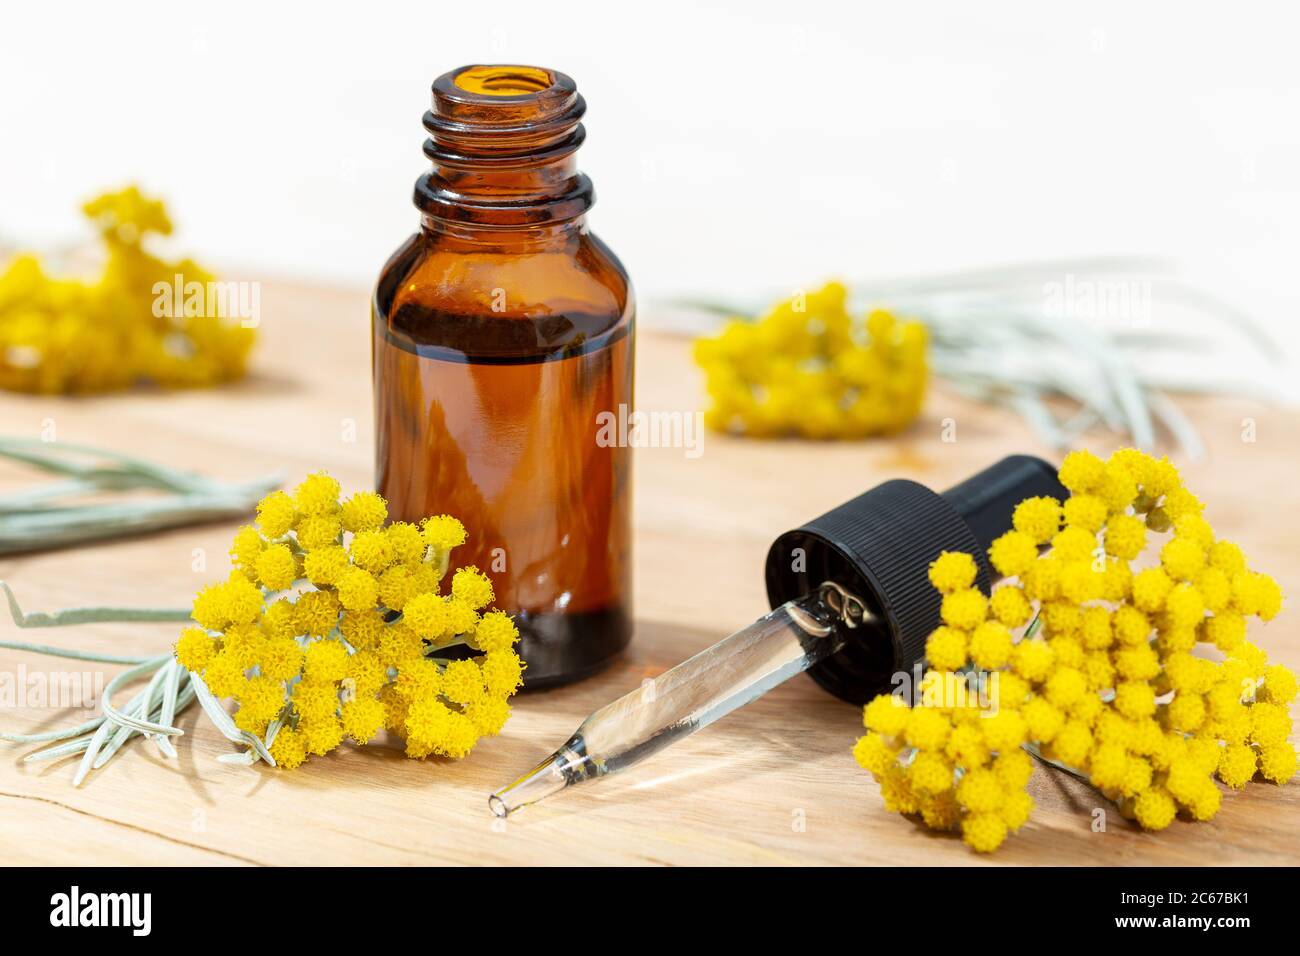 Helichrysum essential oil in amber bottle and pipette. Herbal remedies oil Stock Photo